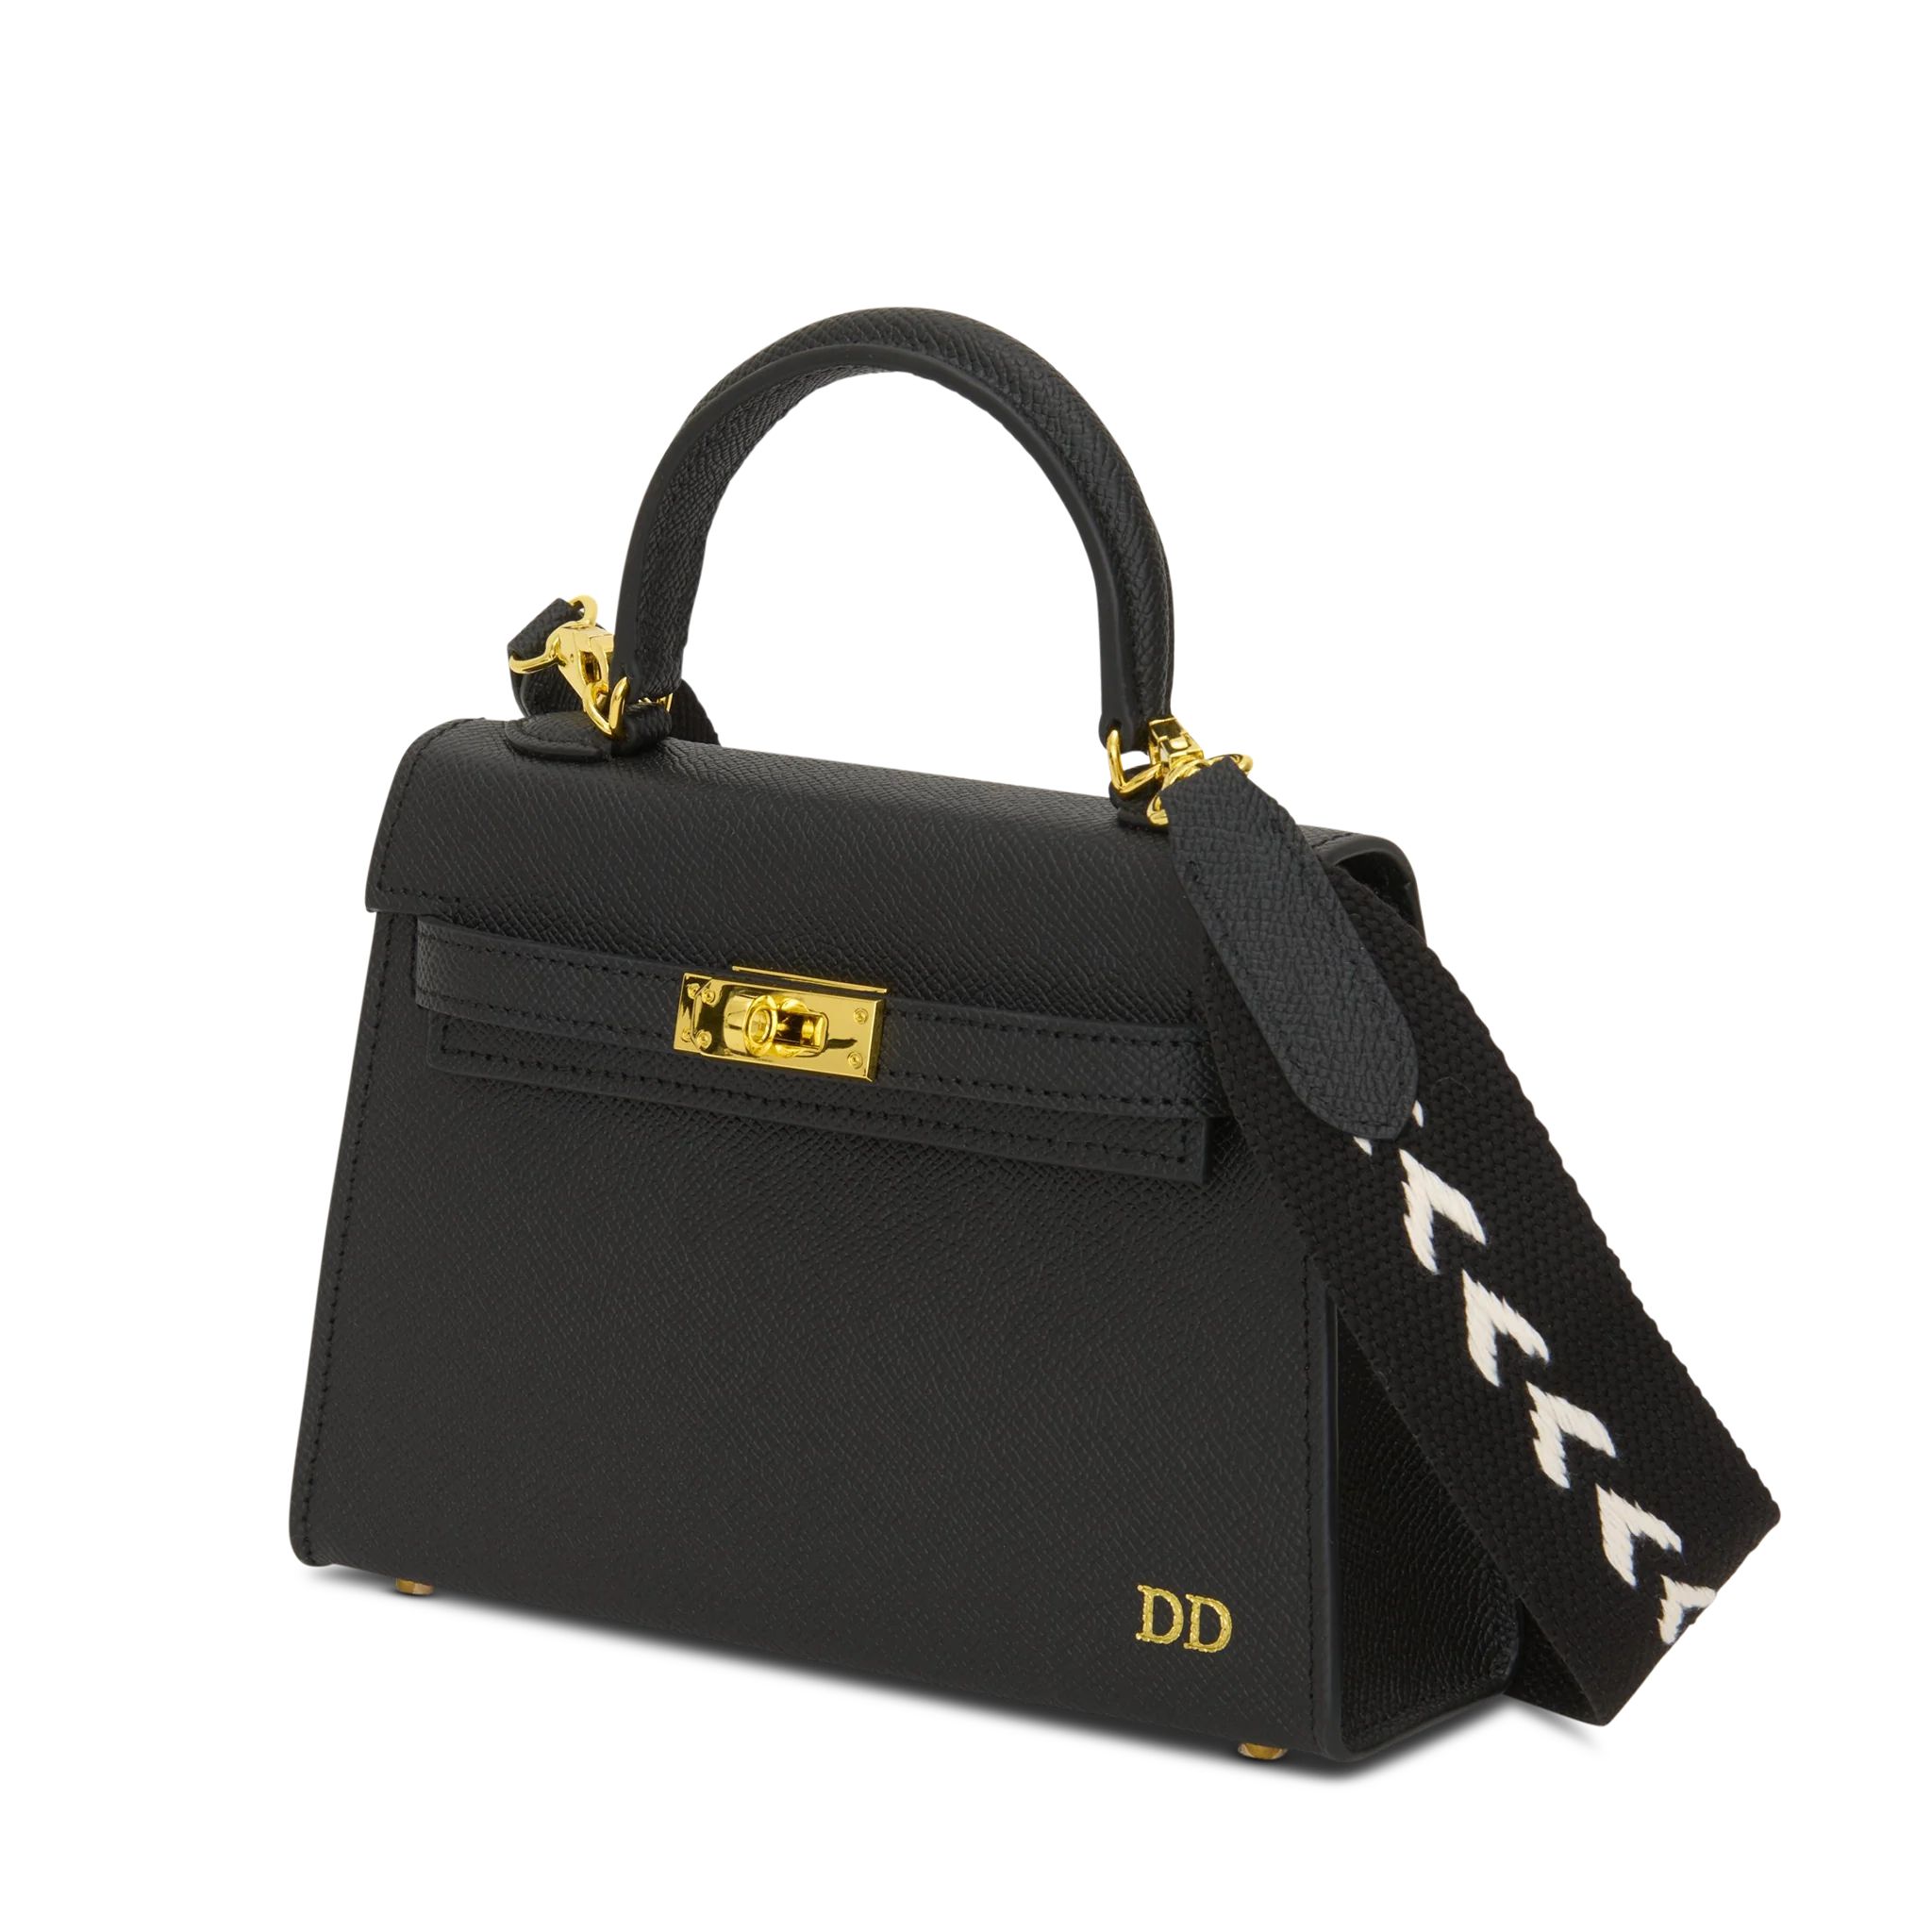 Lily & Bean Hettie Mini Bag - Black with Initials & Patterned Strap | Lily and Bean